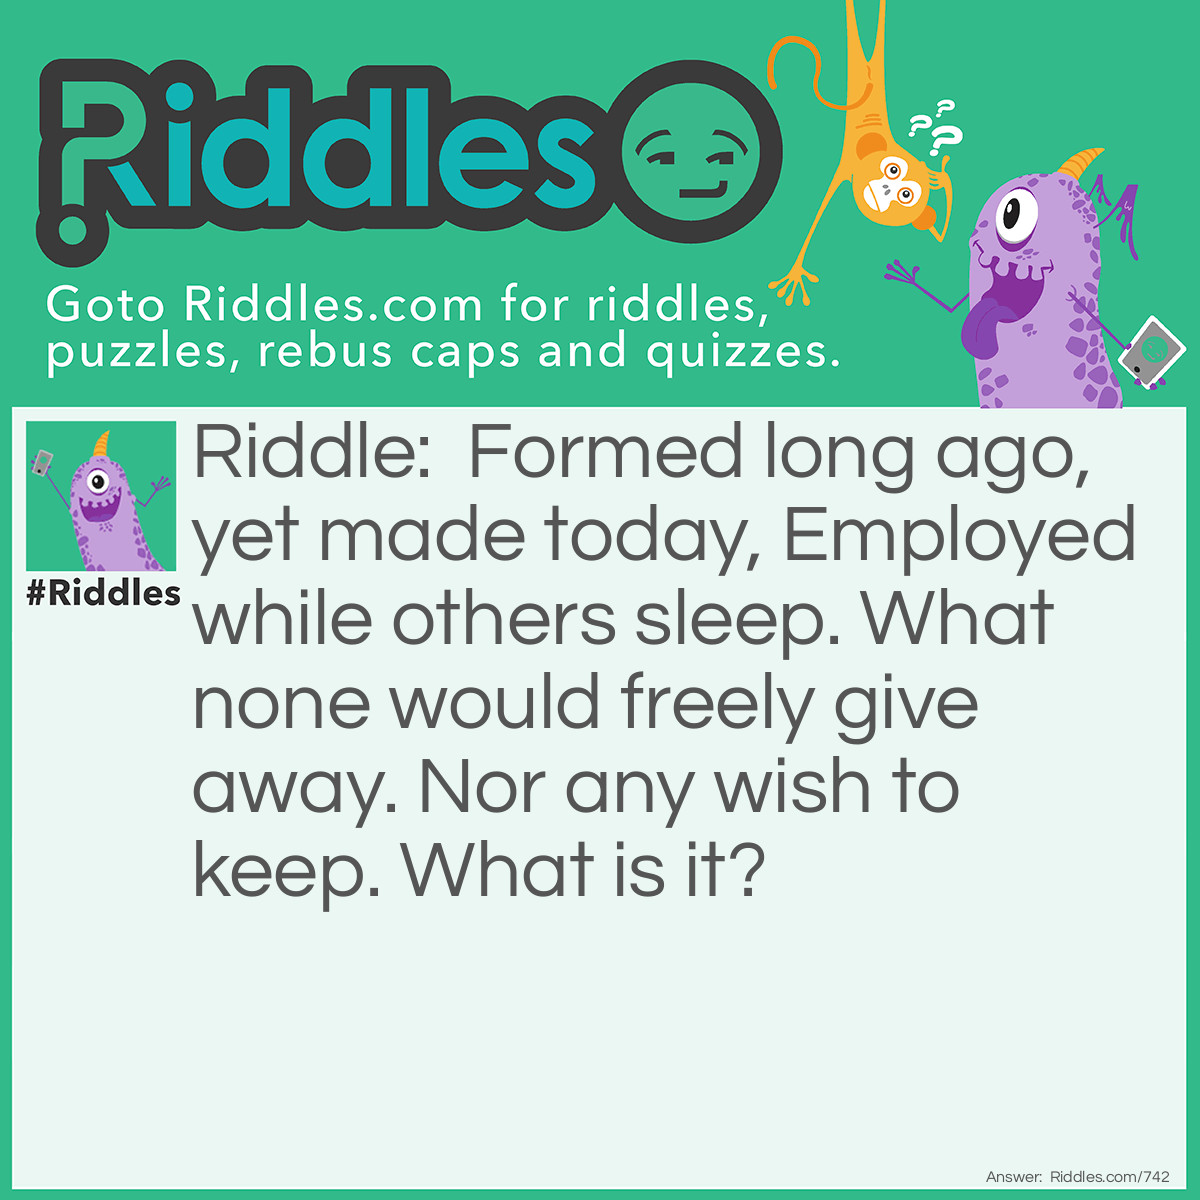 Riddle: Formed long ago, yet made today, Employed while others sleep. What none would freely give away. Nor any wish to keep. What is it? Answer: A bed.